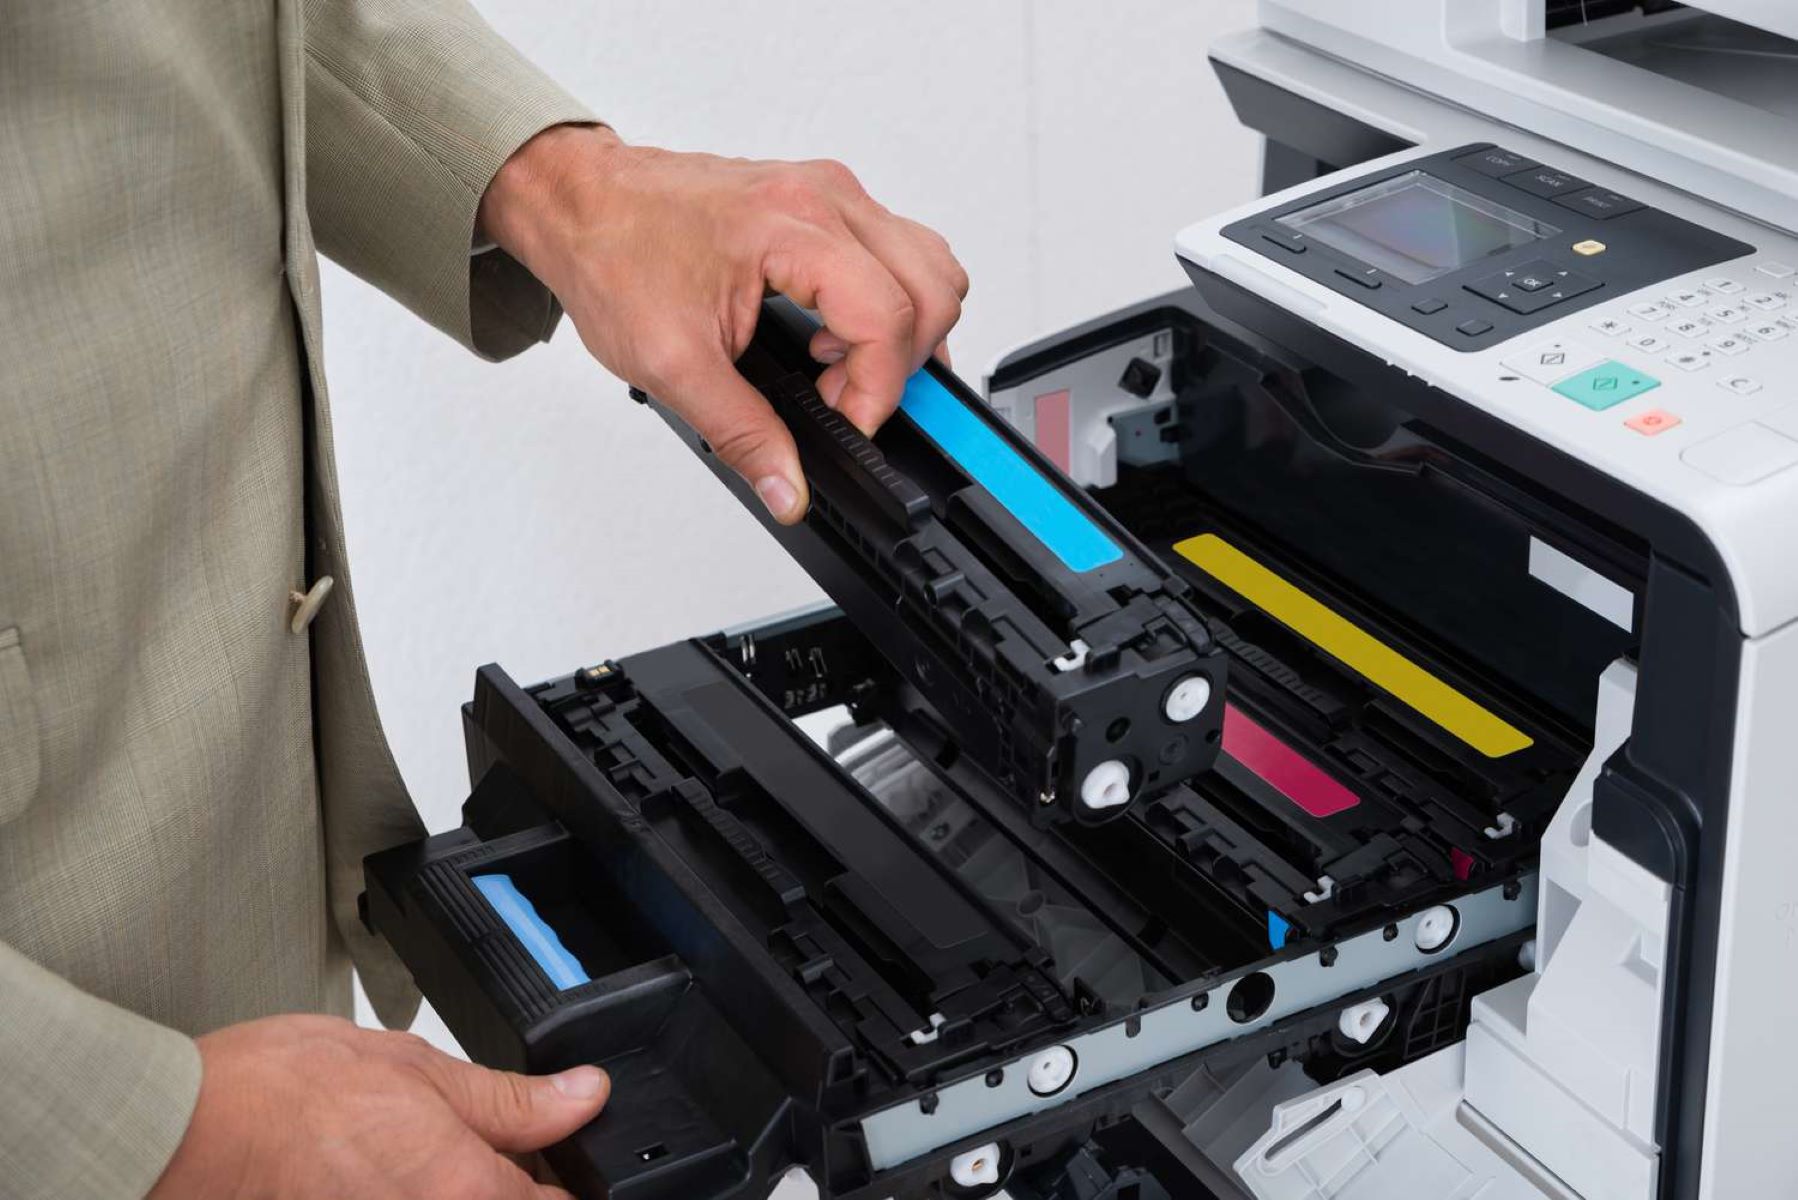 How To Put Ink Cartridge In Hp Printer Storables 0620